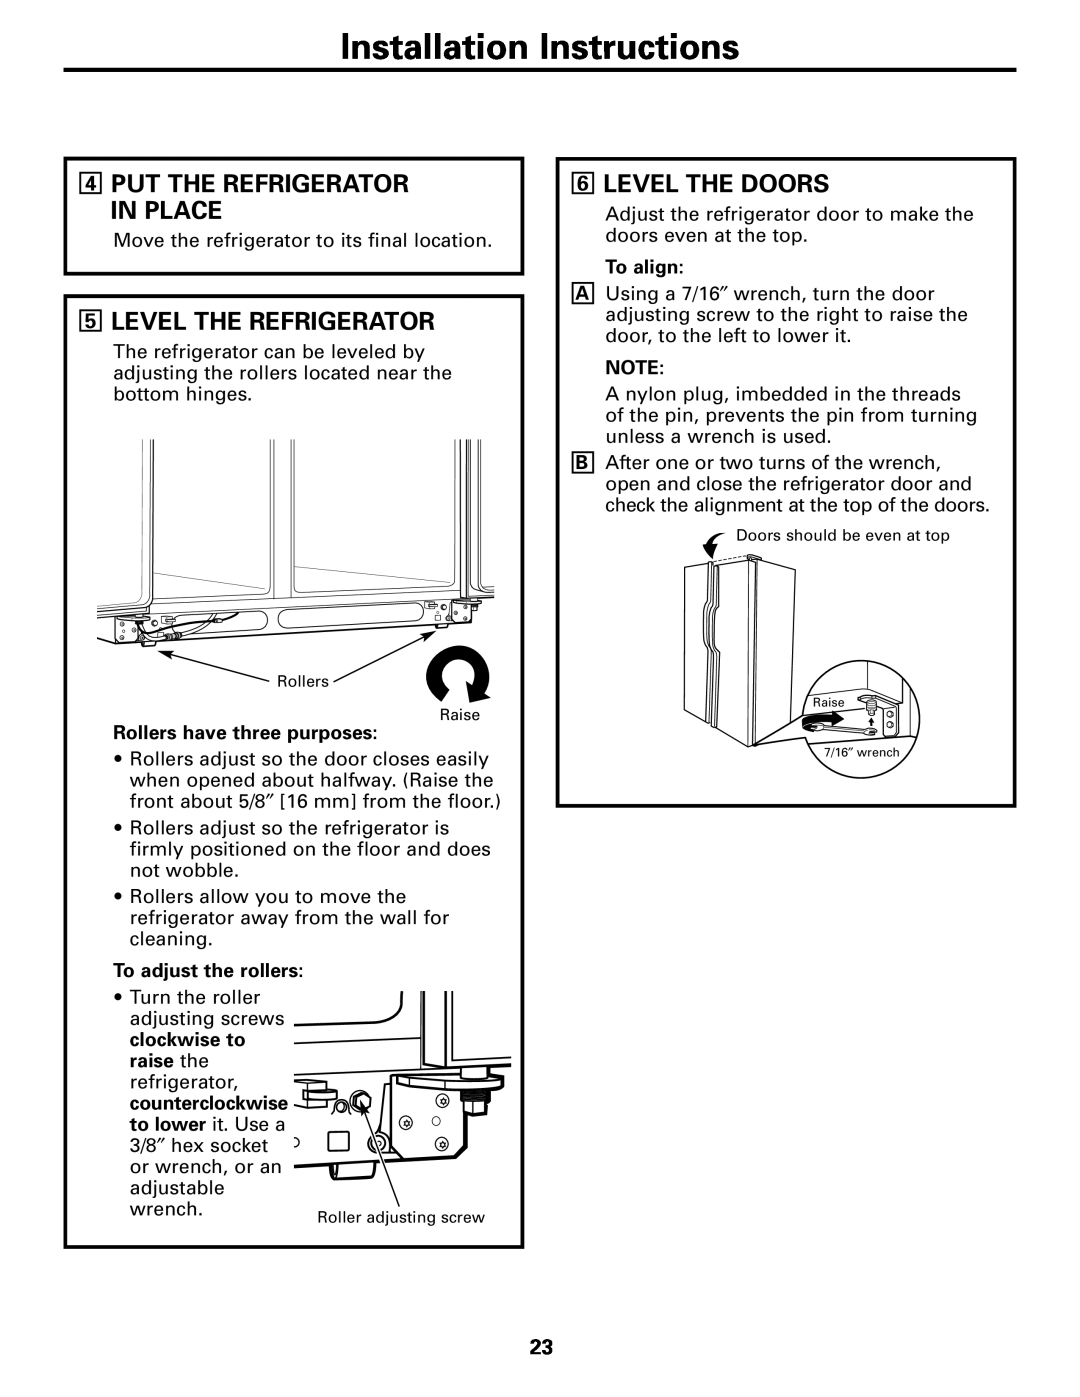 GE 200D26000P022 Level The Refrigerator, Level The Doors, Put The Refrigerator In Place, Installation Instructions 